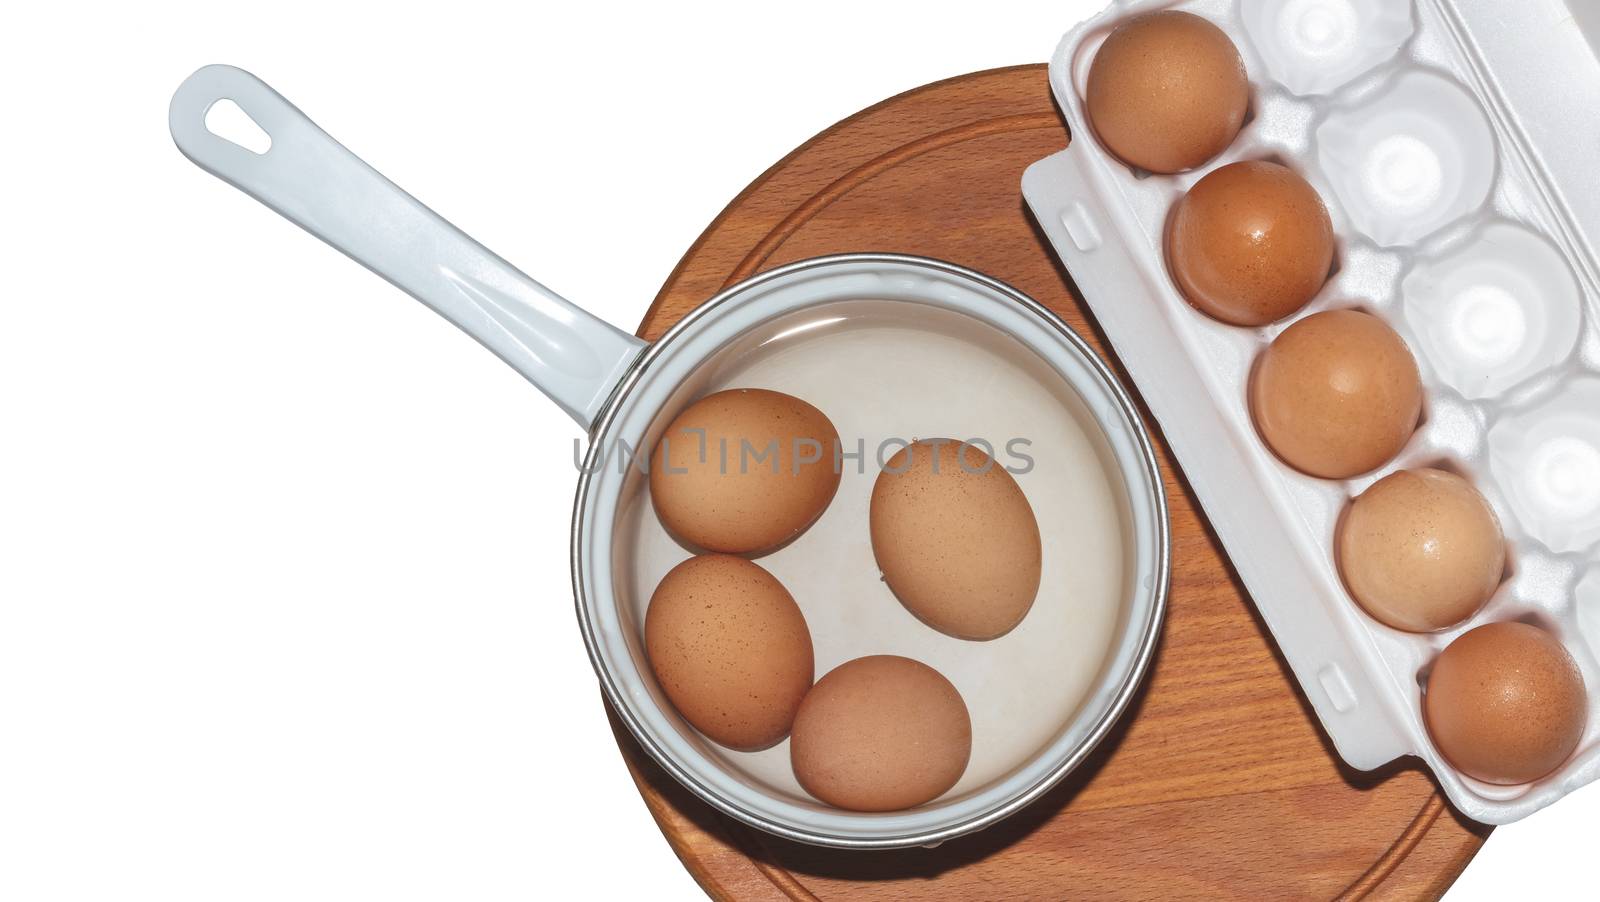 A top close-up shot of a cooking pot and eggs container on a wooden board. Pan is full of water and eggs about to be boiled. Isolated on white background.